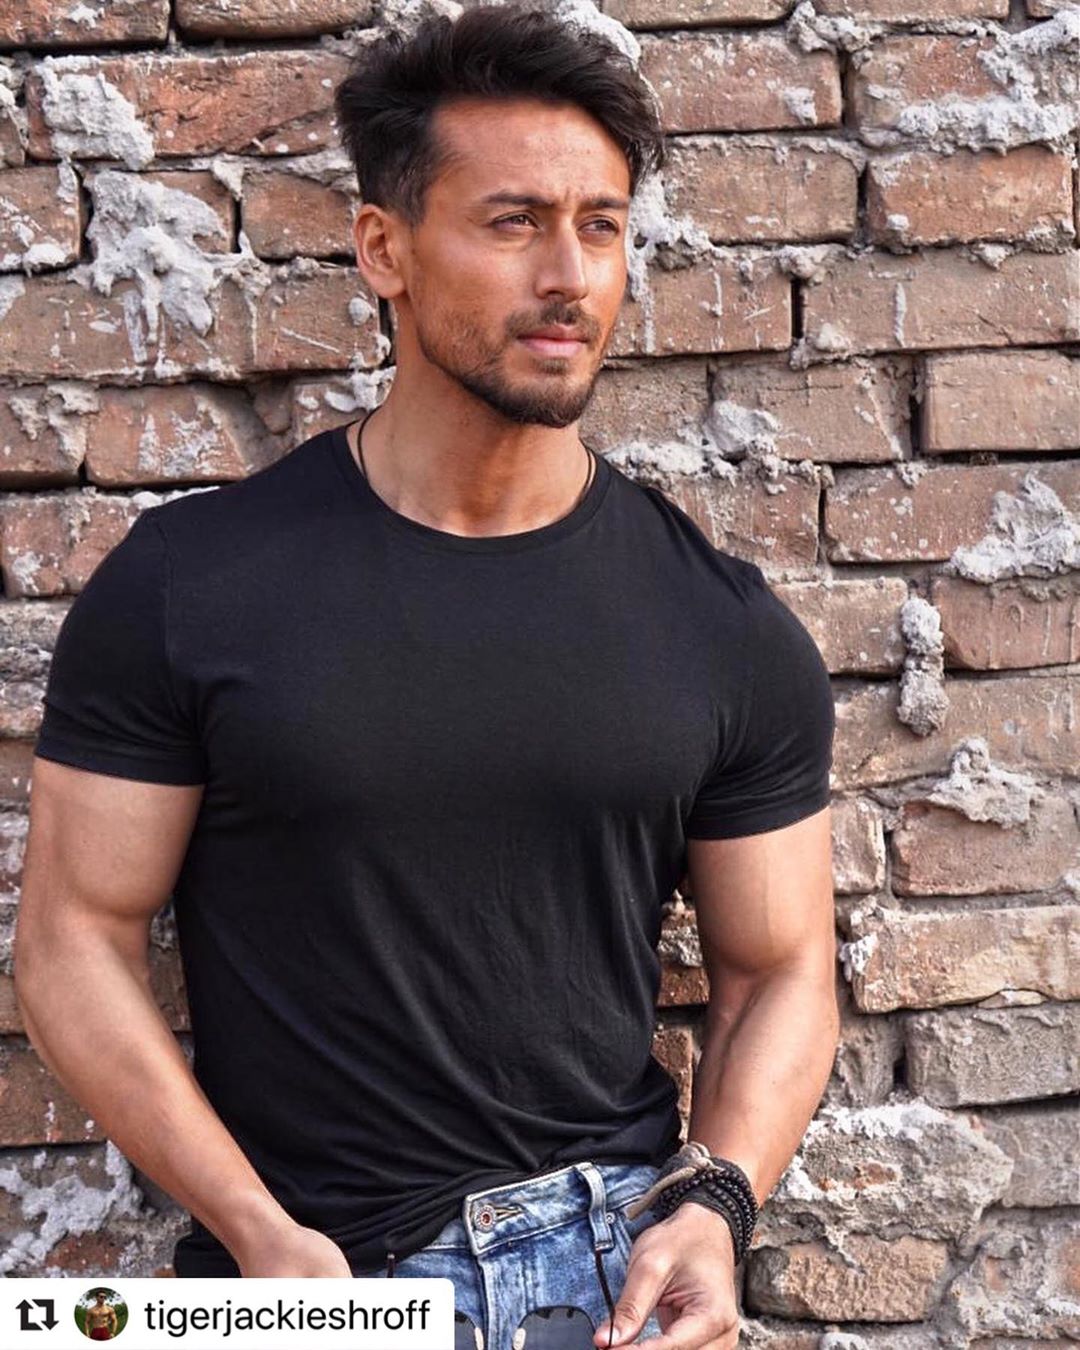 NNNOW - Keep calm it's #ManCrushMonday

Tiger Shroff is making our Monday a little bit better.

#mcm #mancrush #mondaycrush #monday #mondaymood #tigershroff #bollywood #celeb #bollywoodceleb #celebrit...